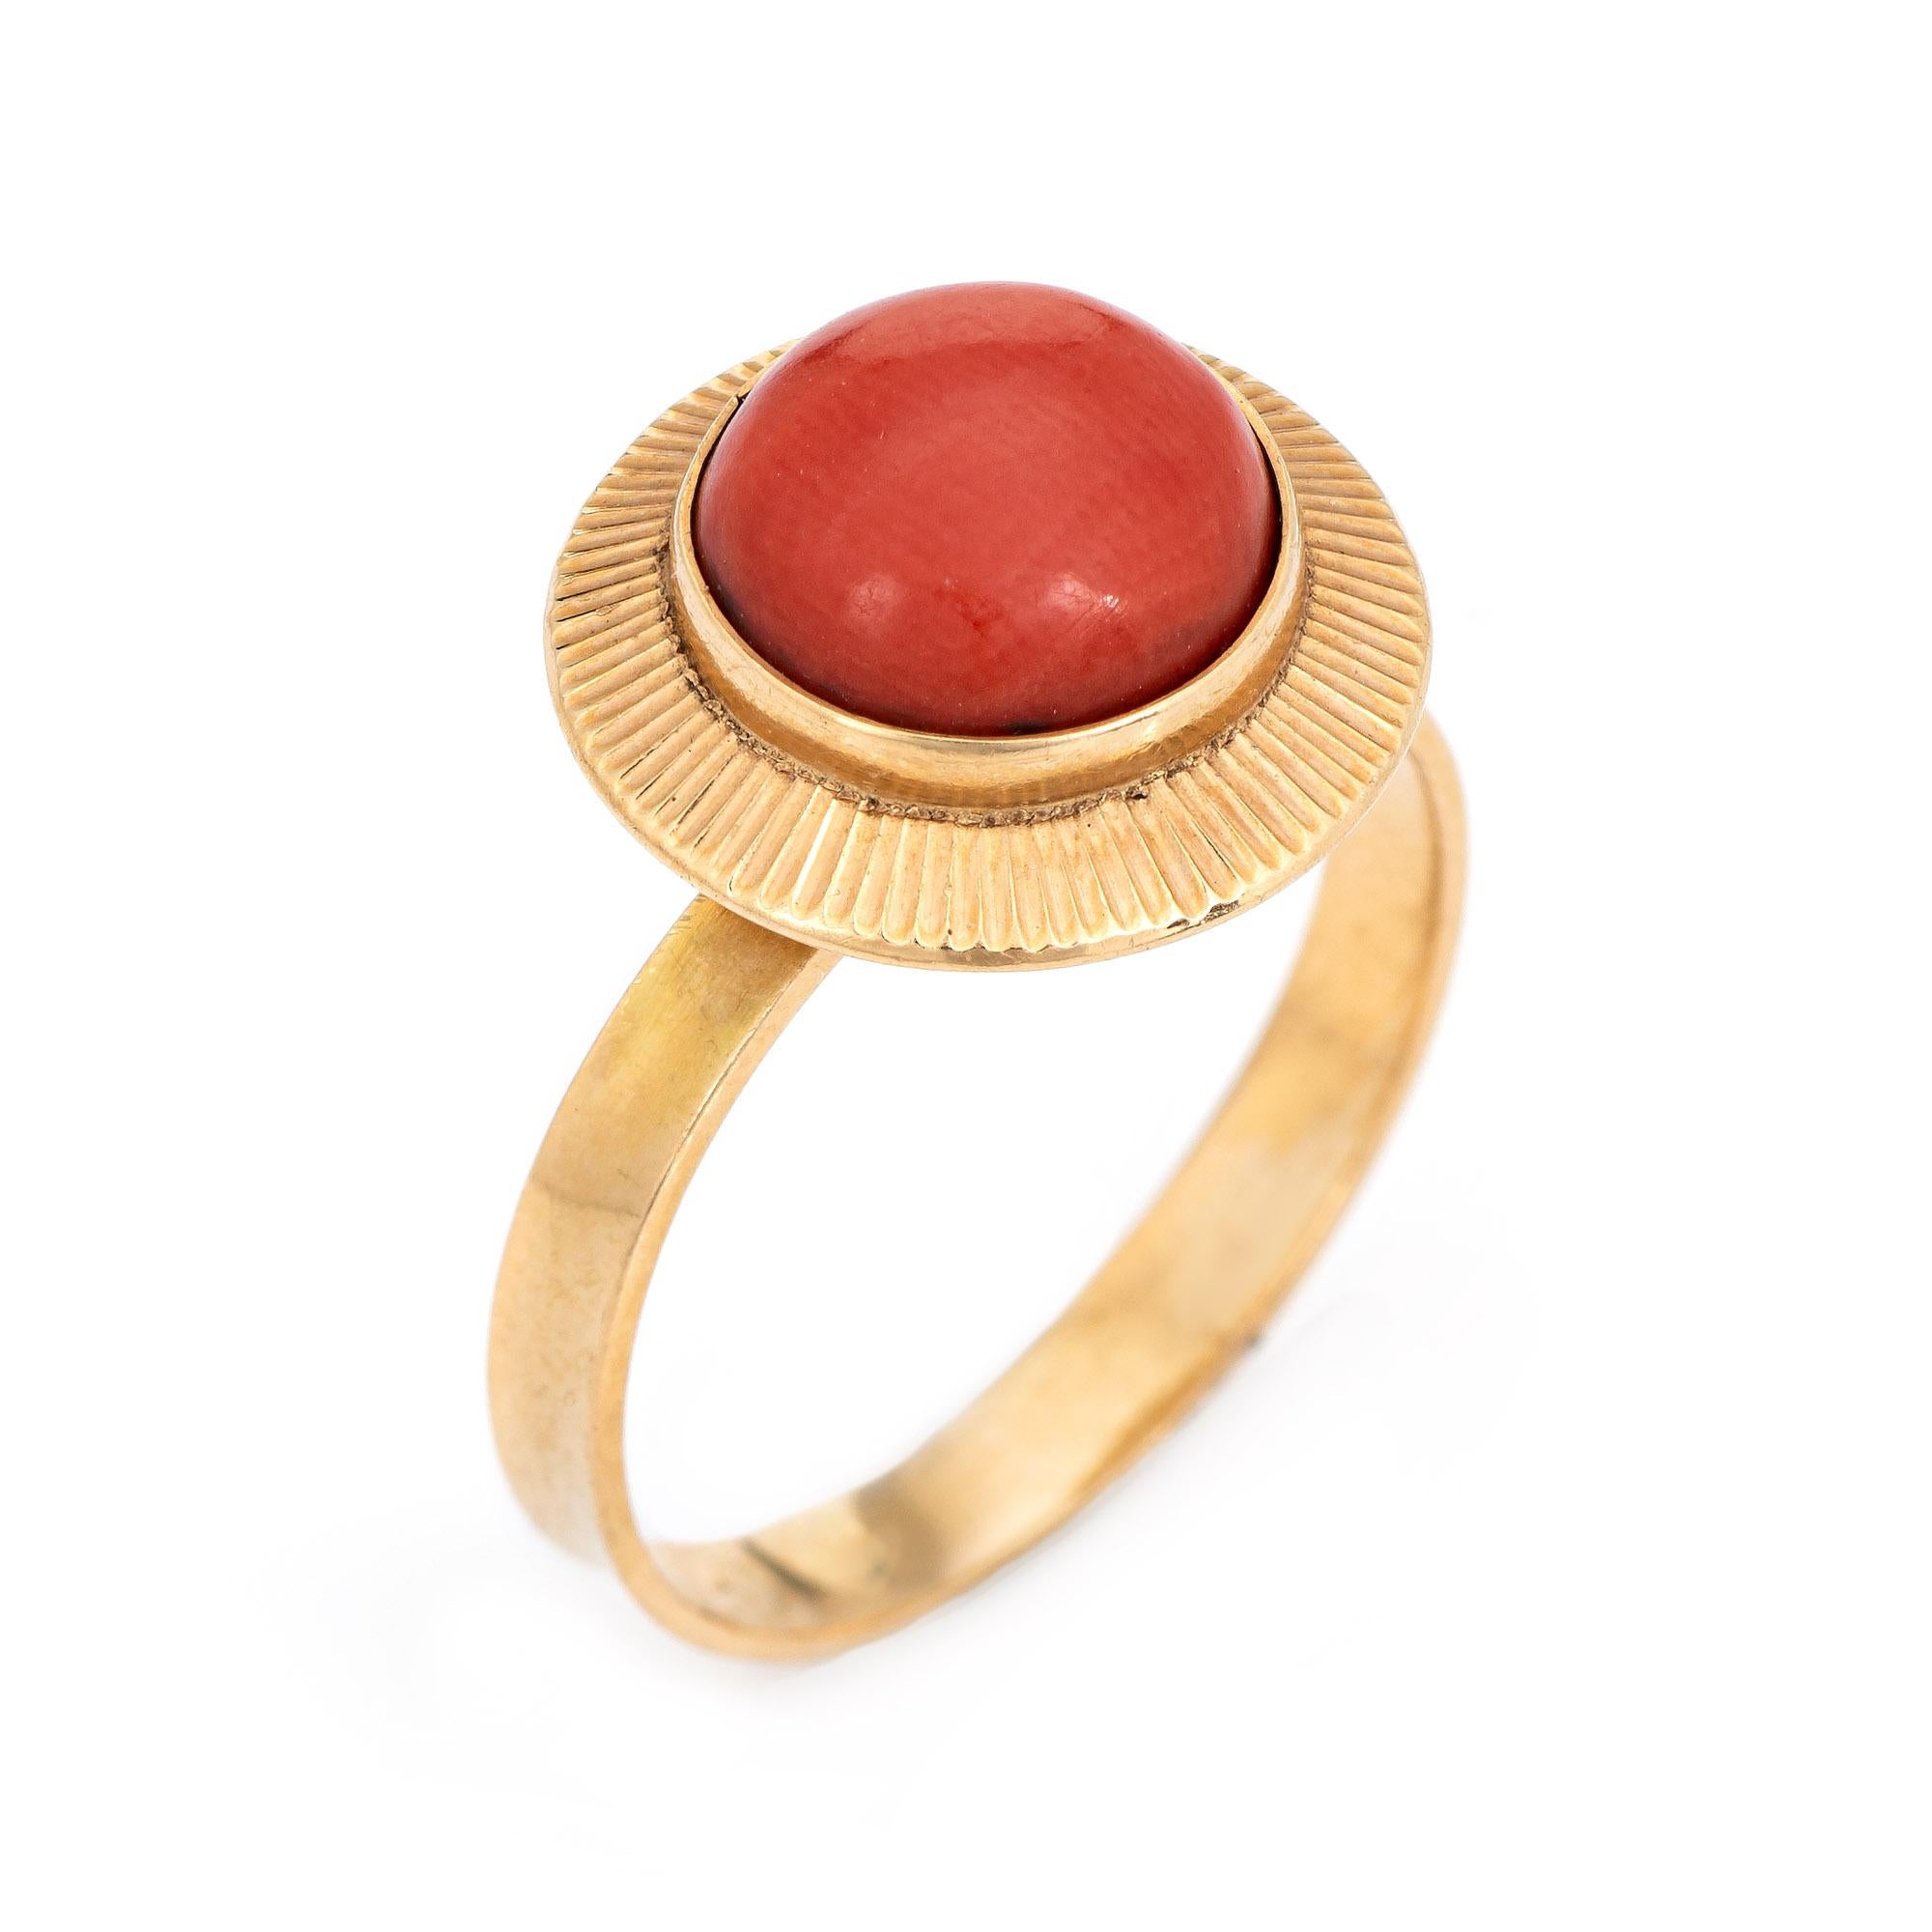 Stylish vintage natural salmon coral ring (circa 1950s to 1960s) crafted in 18 karat yellow gold. 

Cabochon cut coral measures 8mm diameter (estimated at 2 carats). The coral is in excellent condition and free of cracks or chips. 

The salmon hued